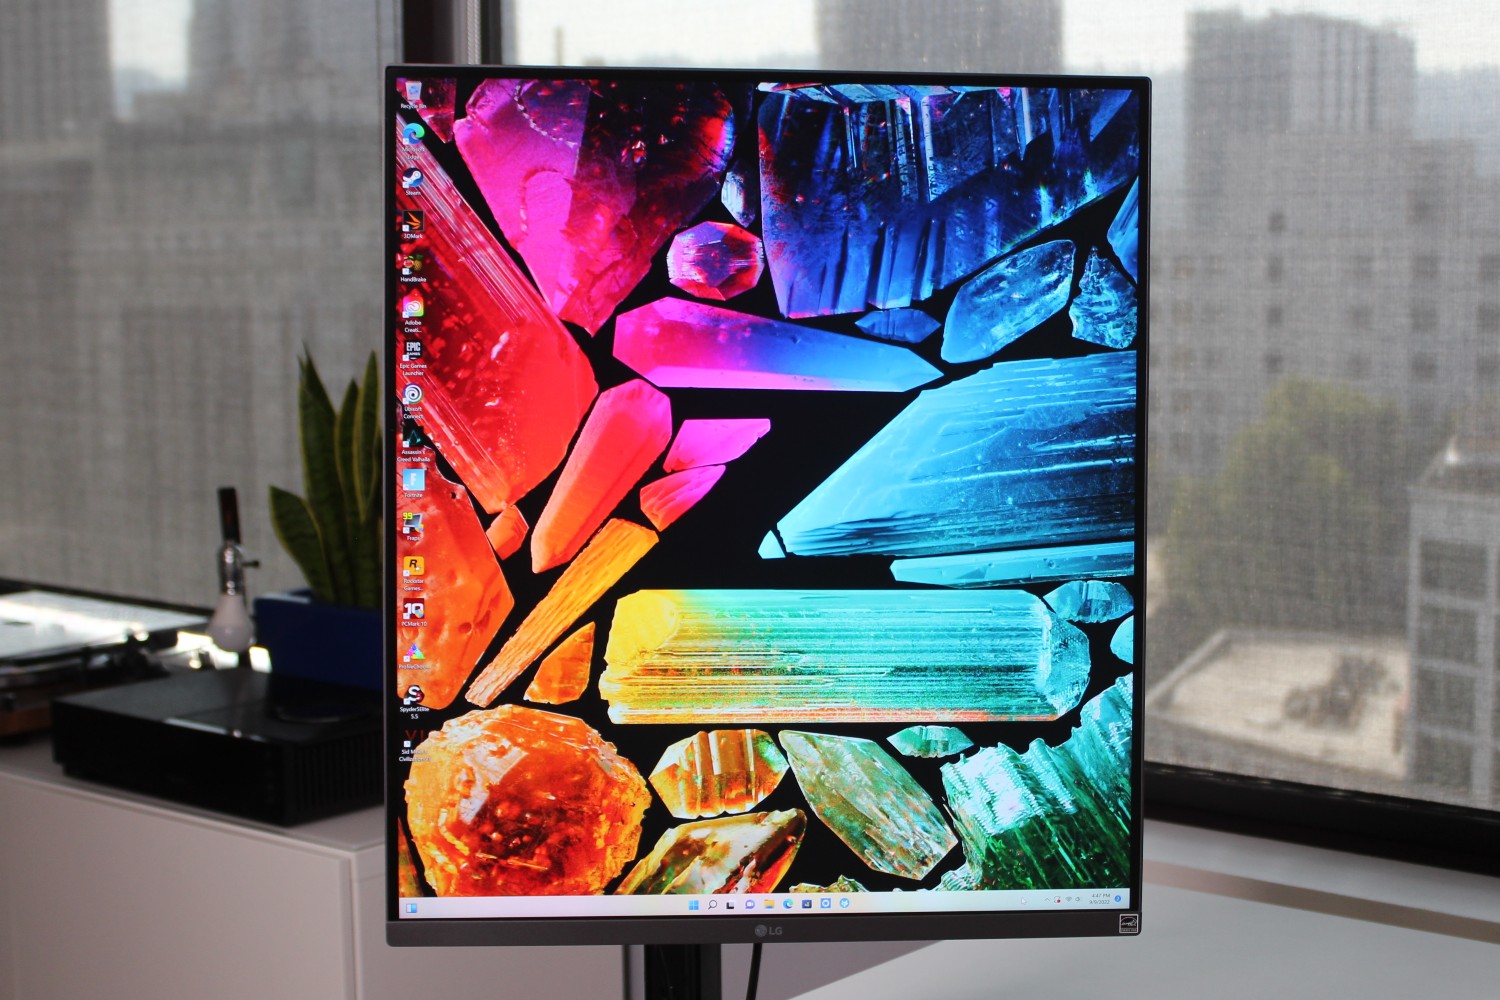 The LG DualUp monitor with a colorful wallpaper.